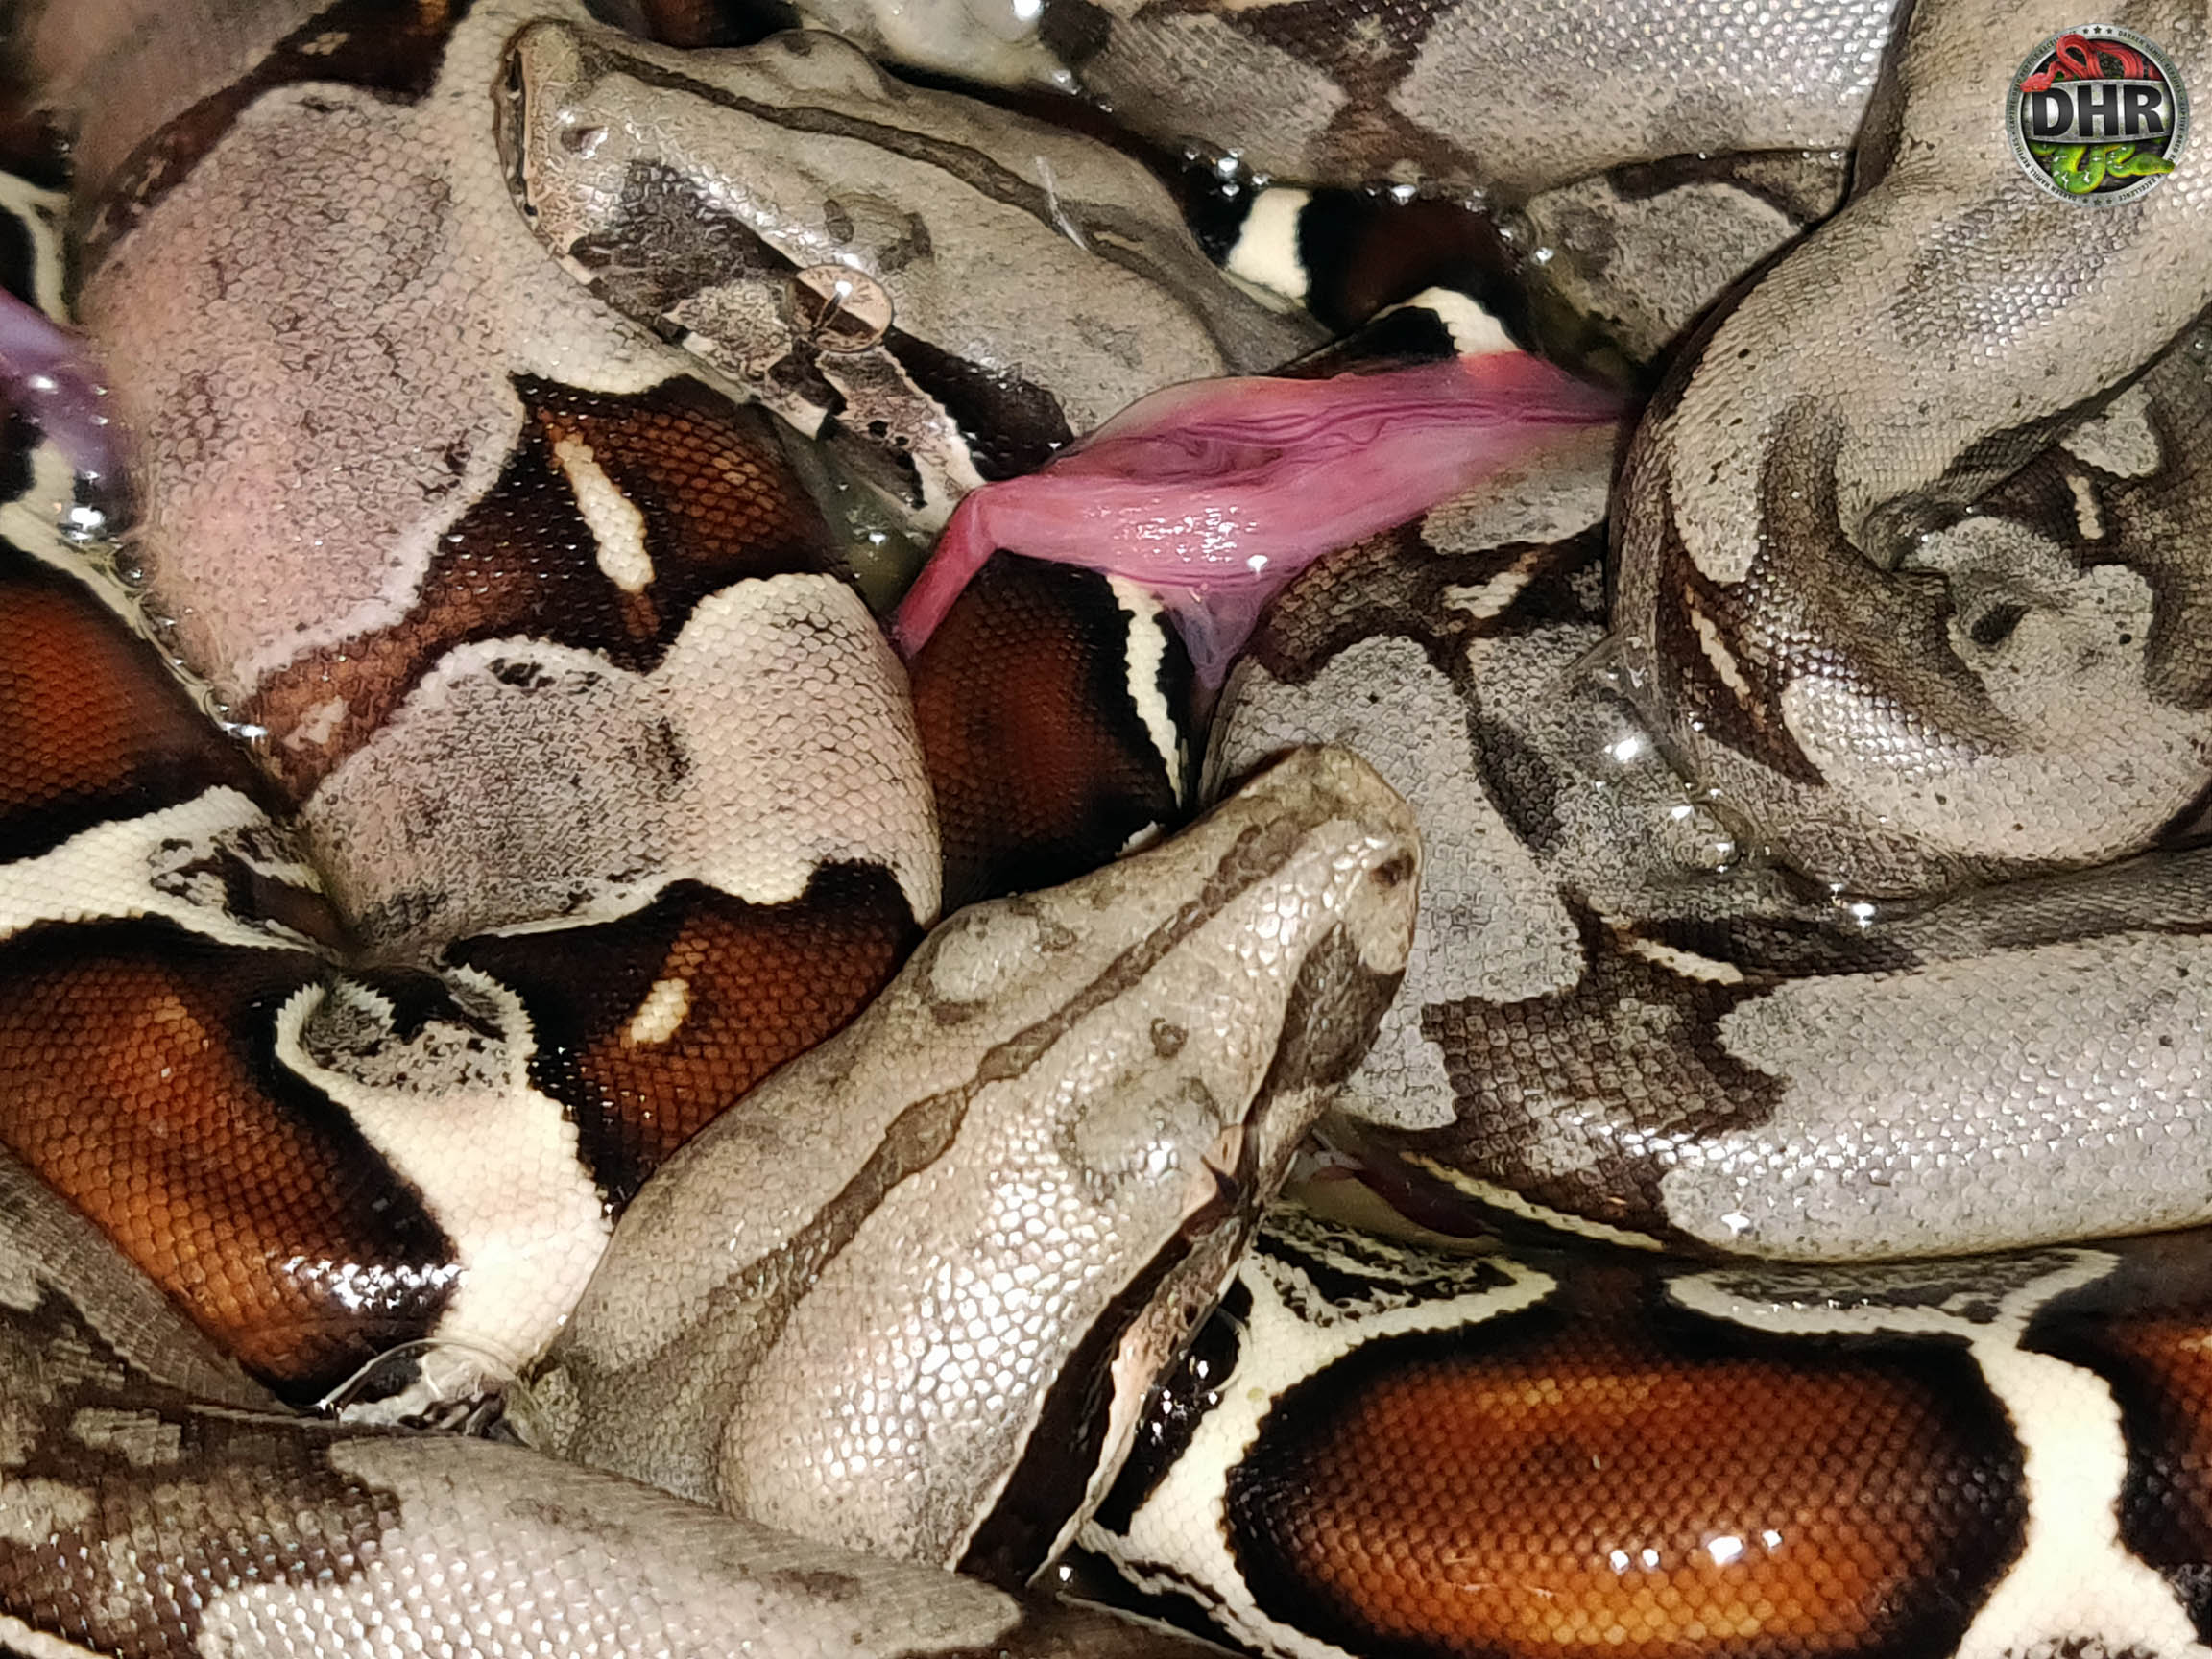 Suriname red-tailed boas are here